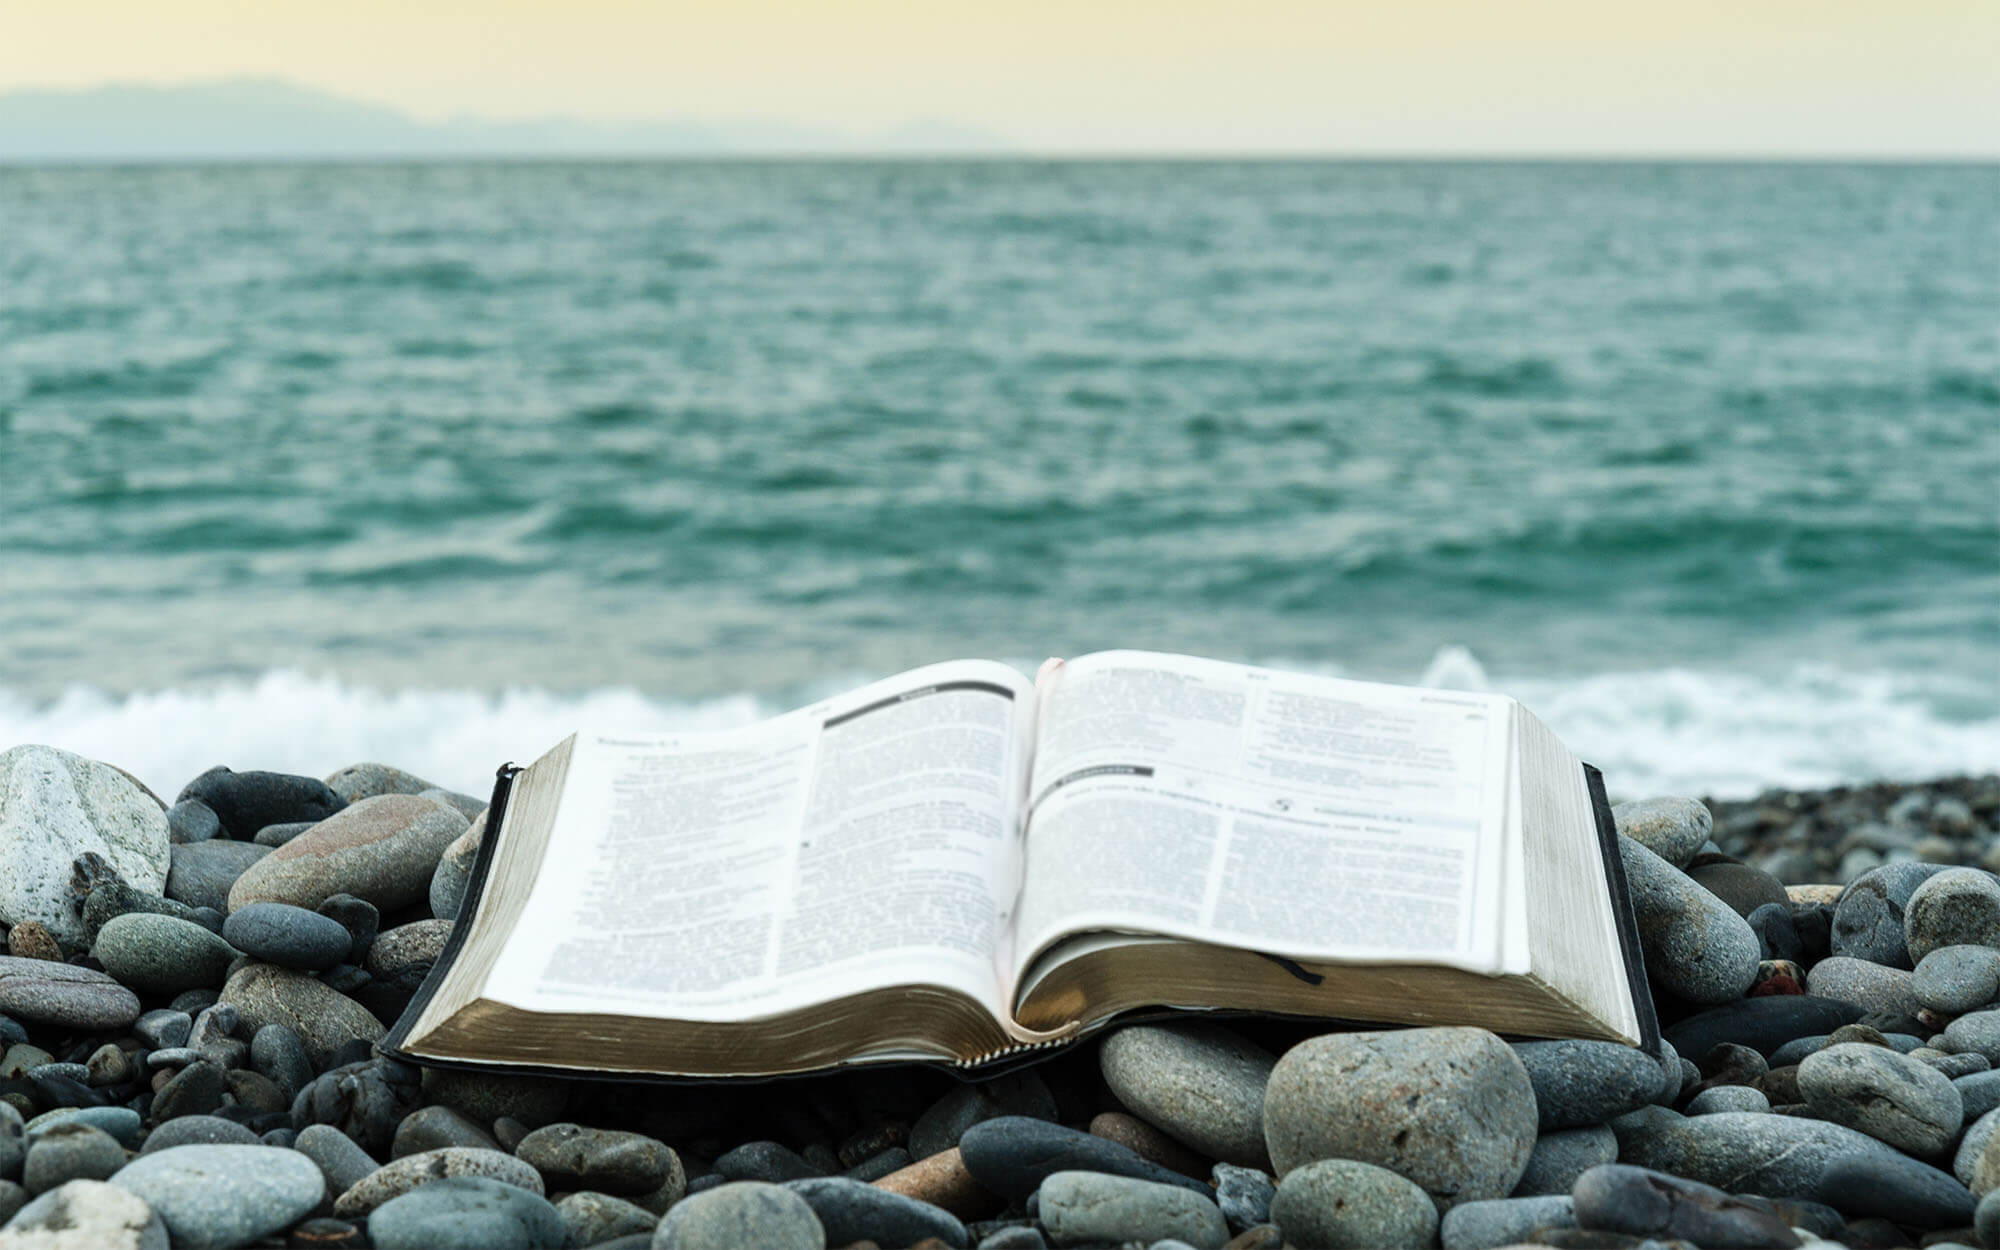 Bible Open On Top Of Small Stones In Front Of The Green Sea